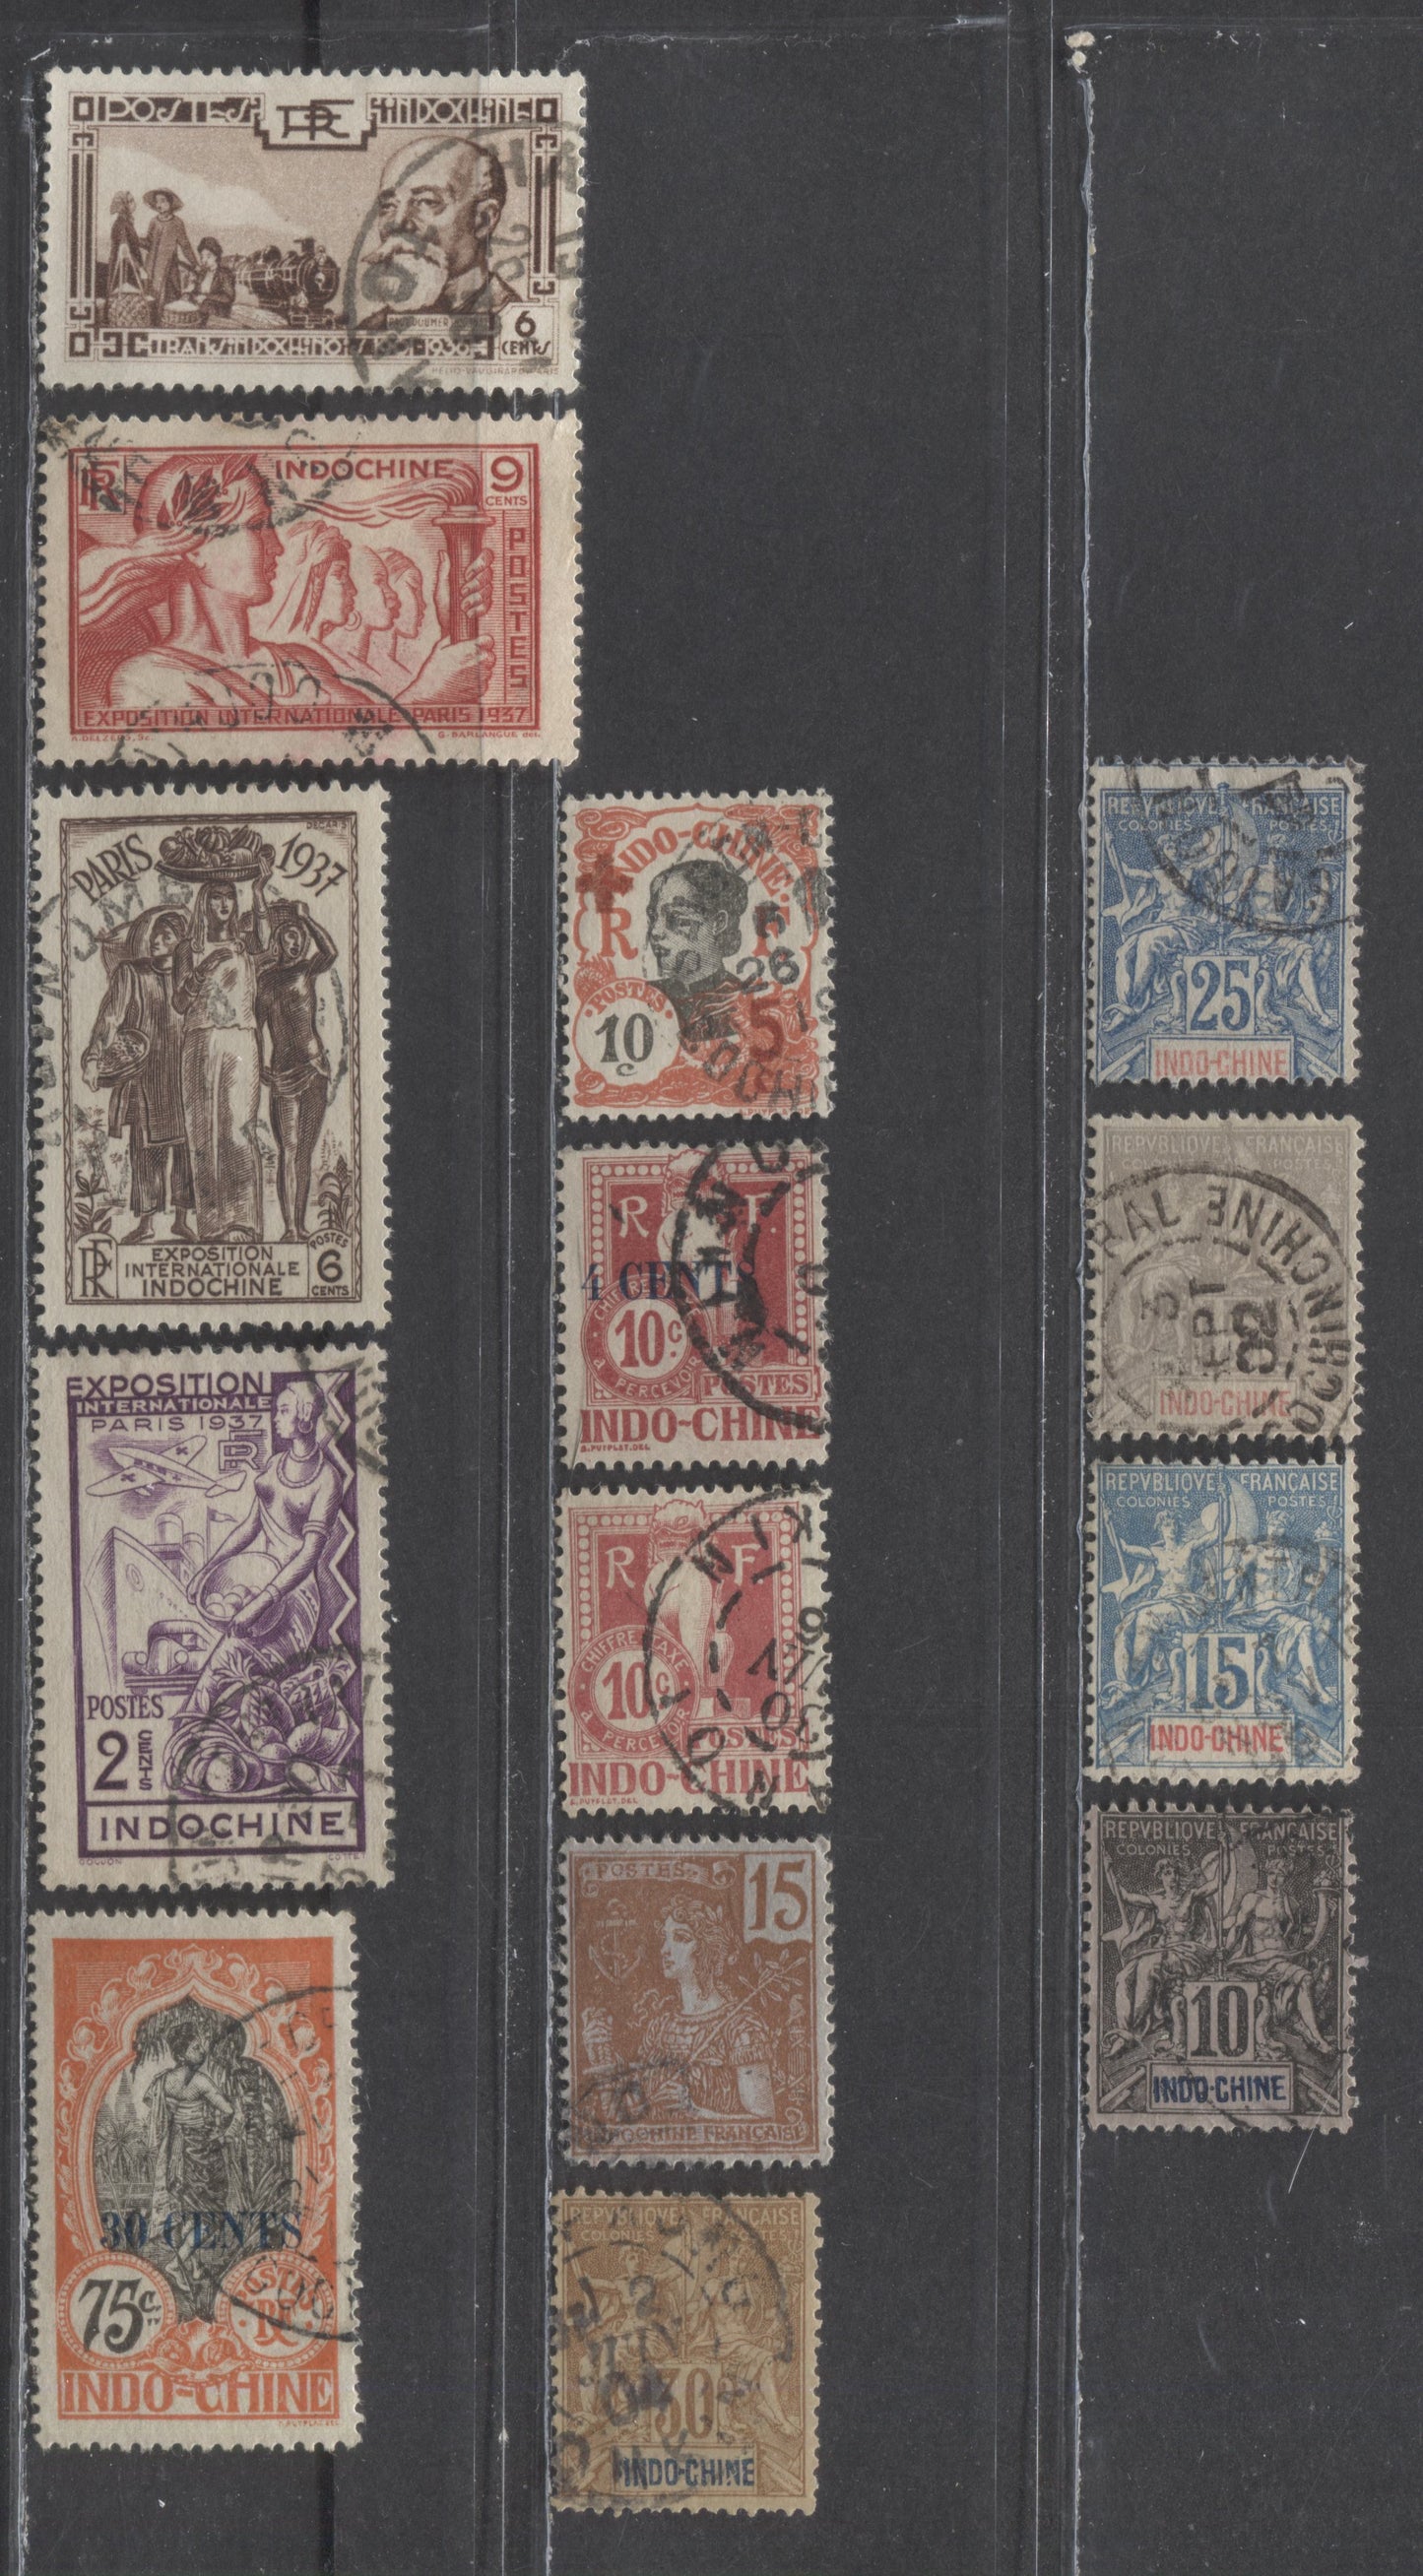 Lot 368 Indo-China SC#8/J21 1892-1938 Definitives, Semi Postals & Postage Dues, 14 Fine/Very Fine Used Singles, Click on Listing to See ALL Pictures, 2022 Scott Classic Cat. $32.55 USD